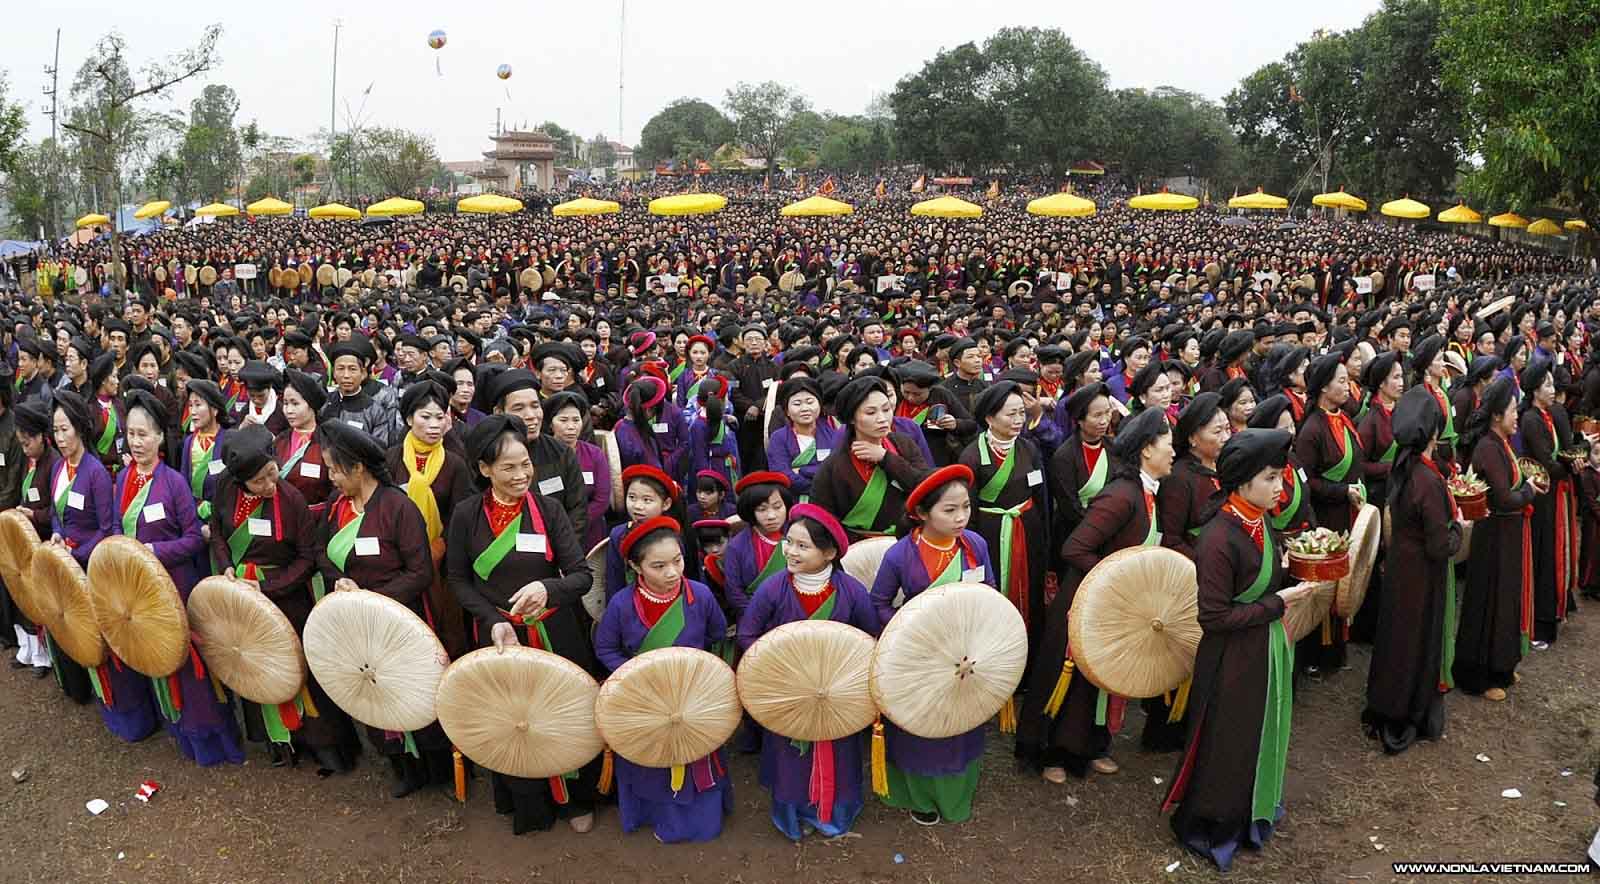 Vietnam Adventure Tours to Be Spent on Top Festivals for Tourists